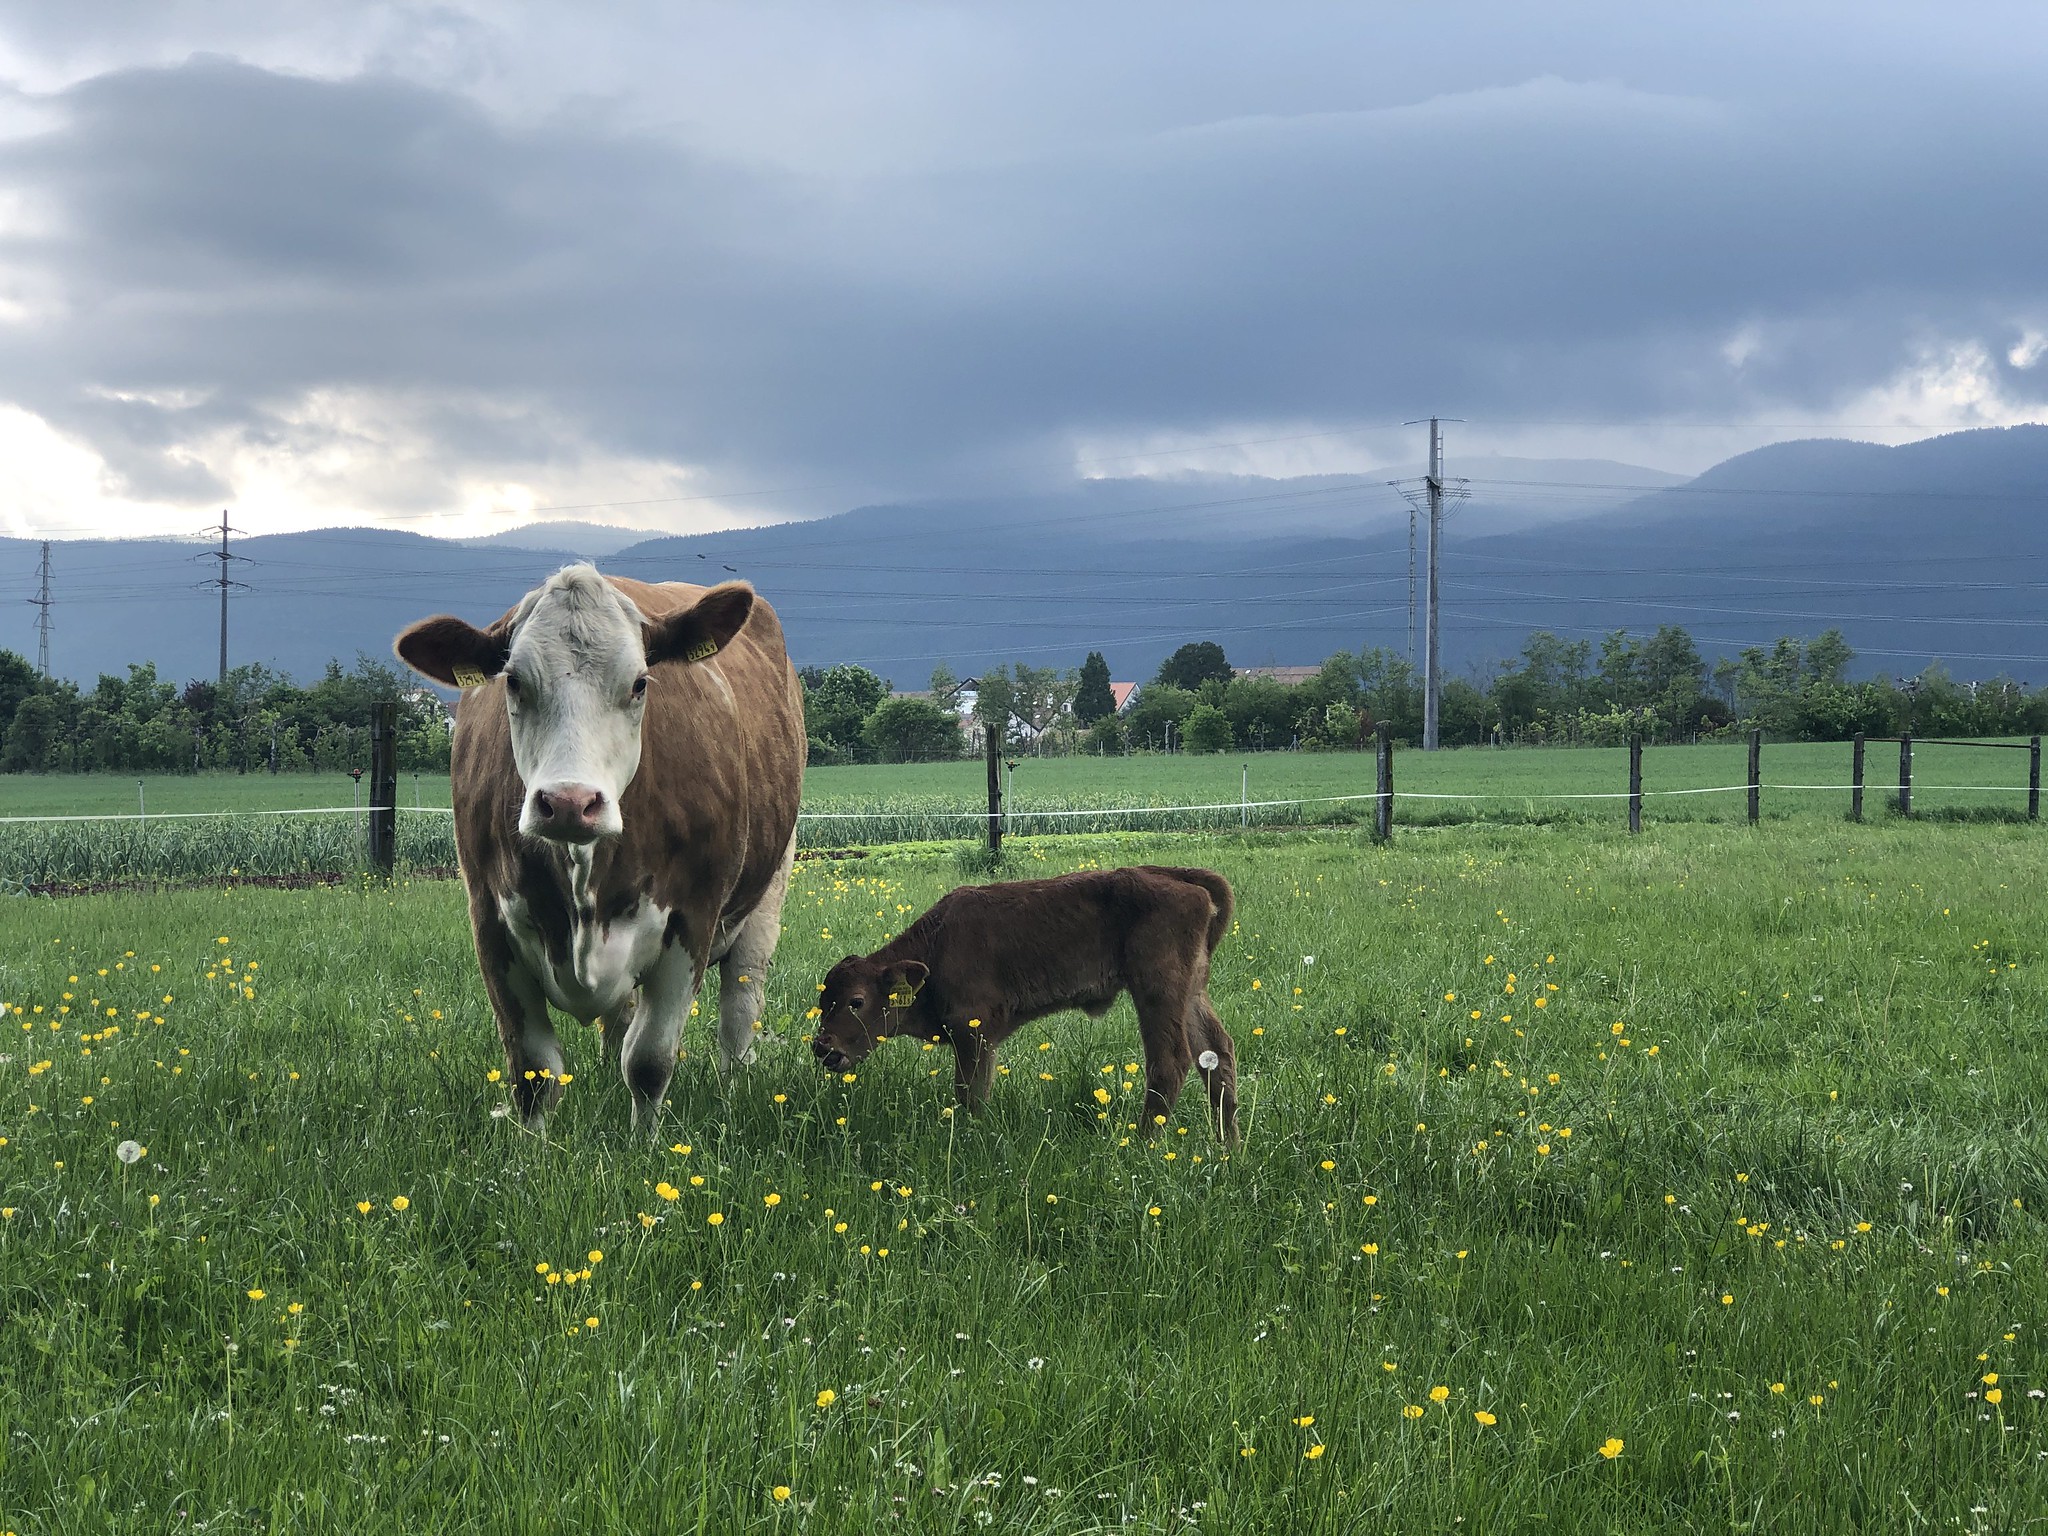 A calf and mother